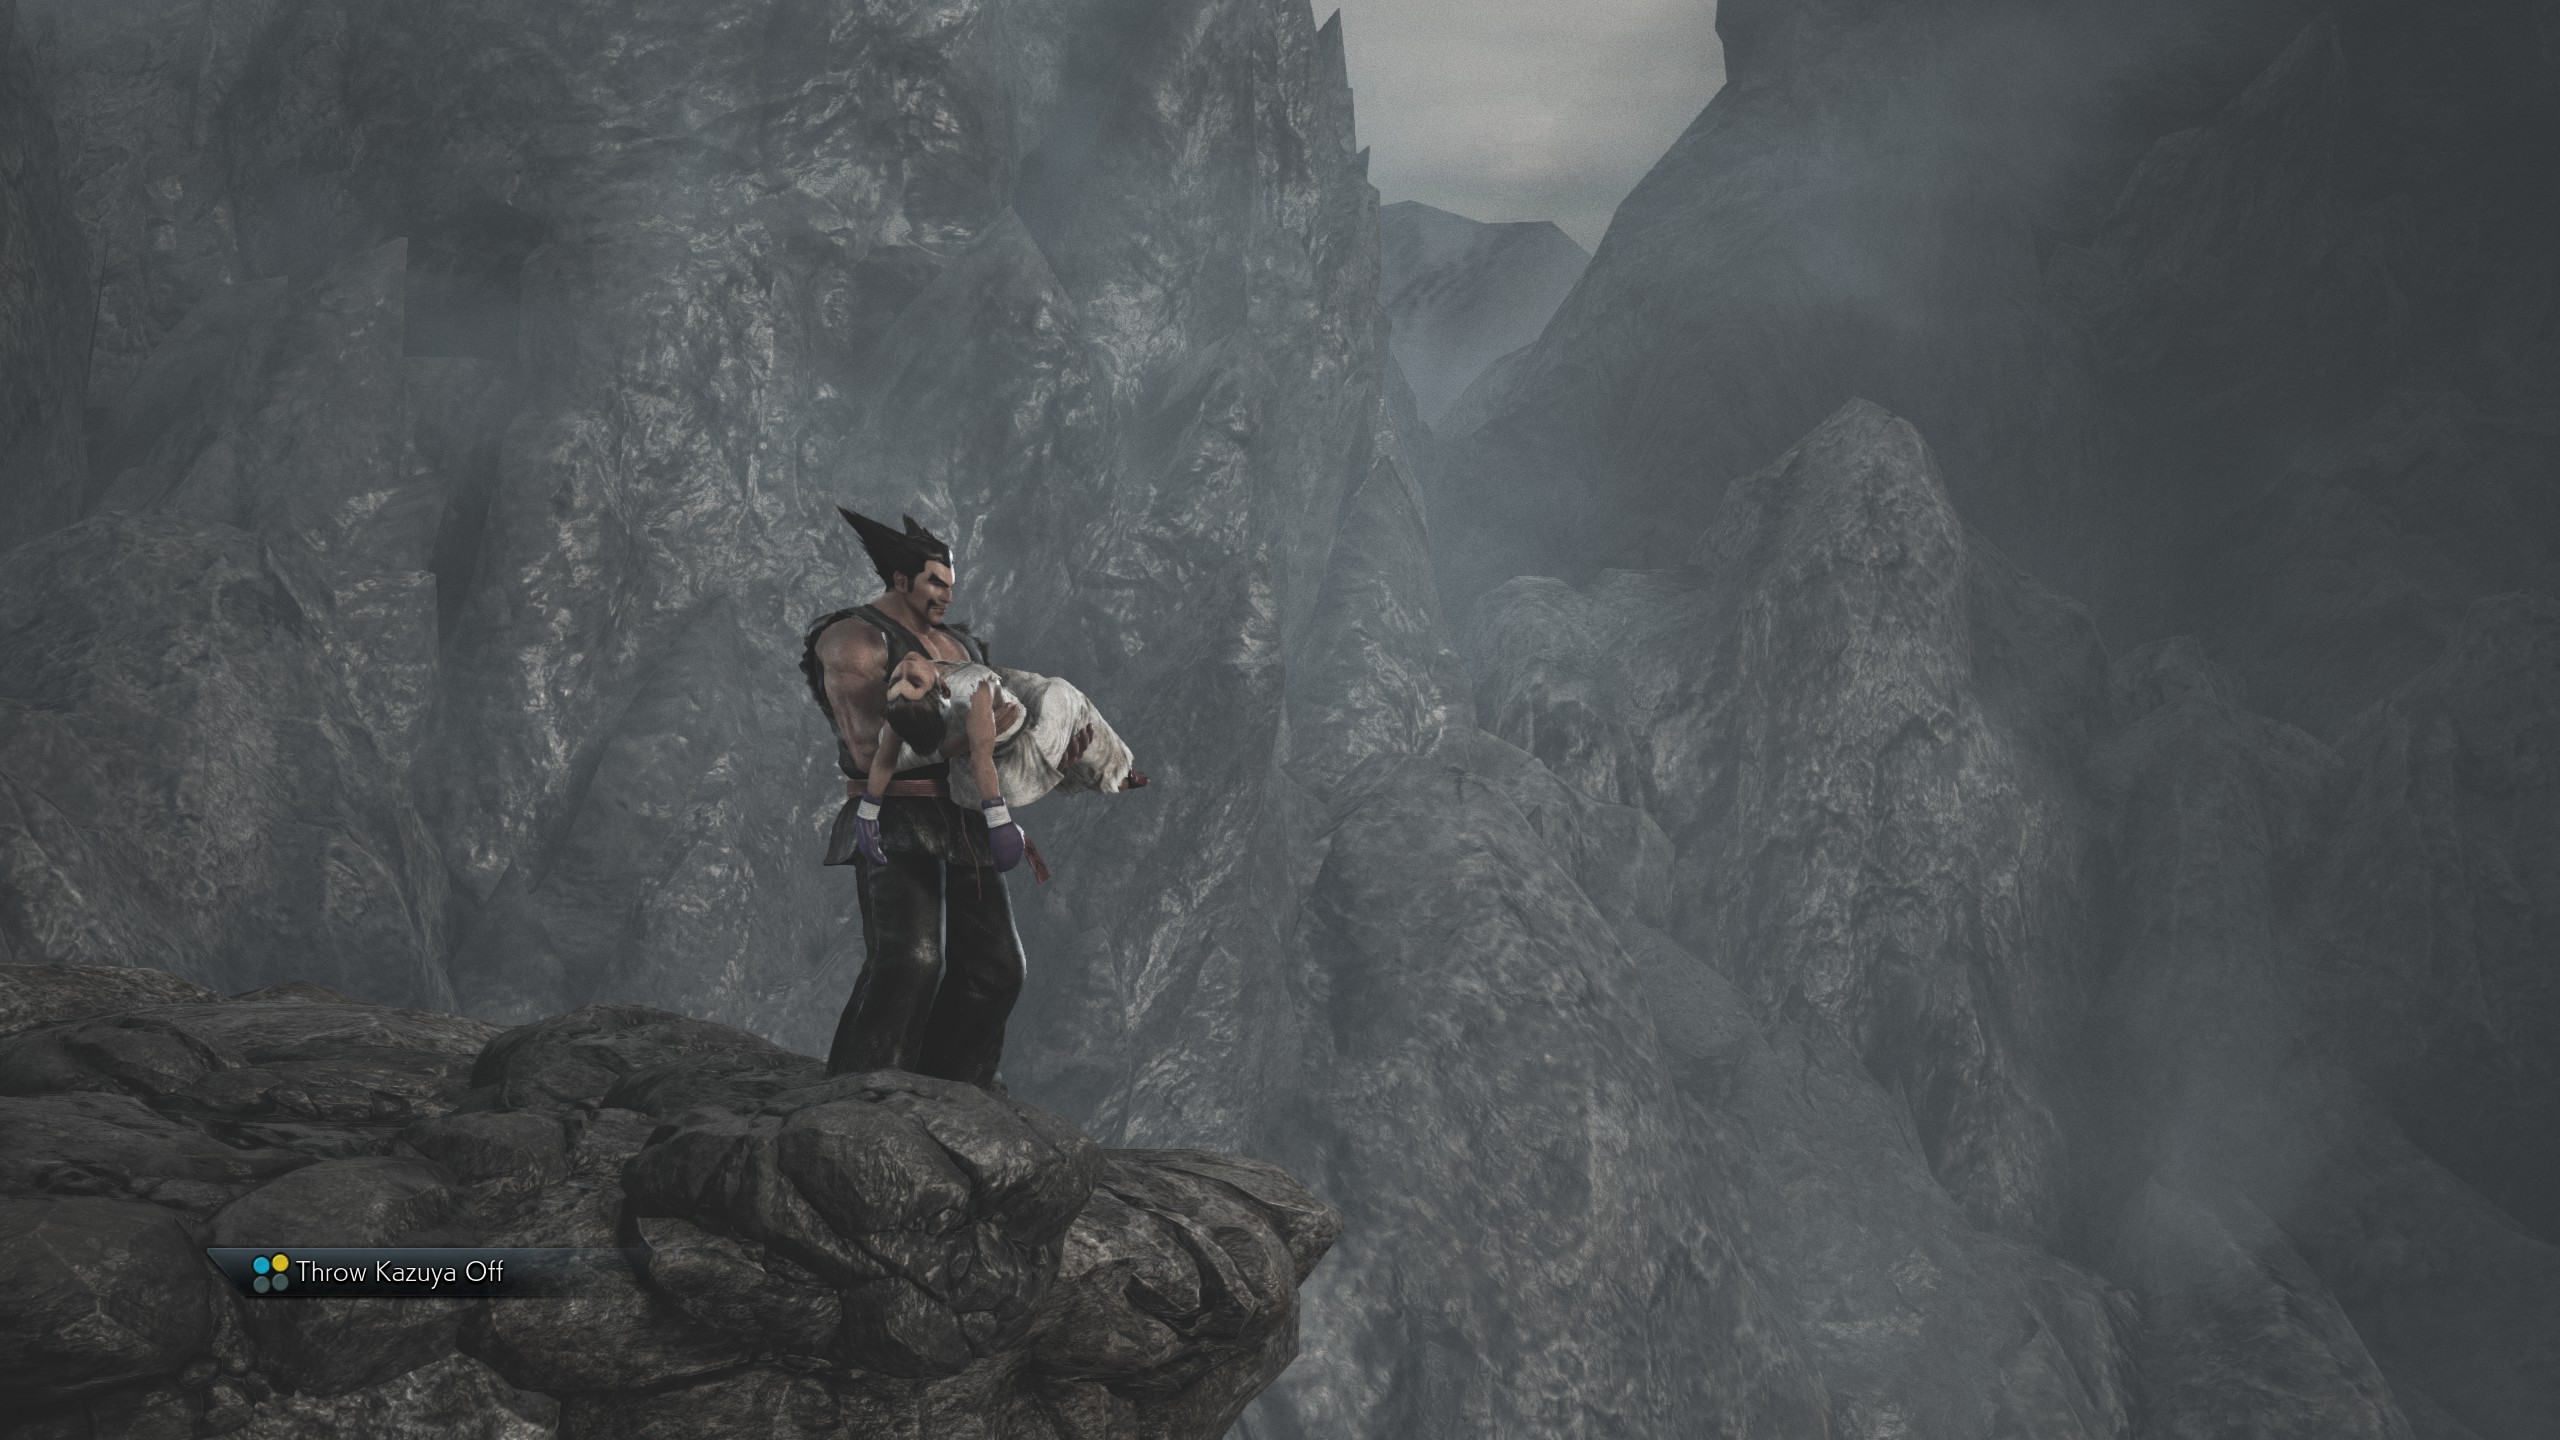 A button prompt urges Heihachi to throw Kazuya off a cliff